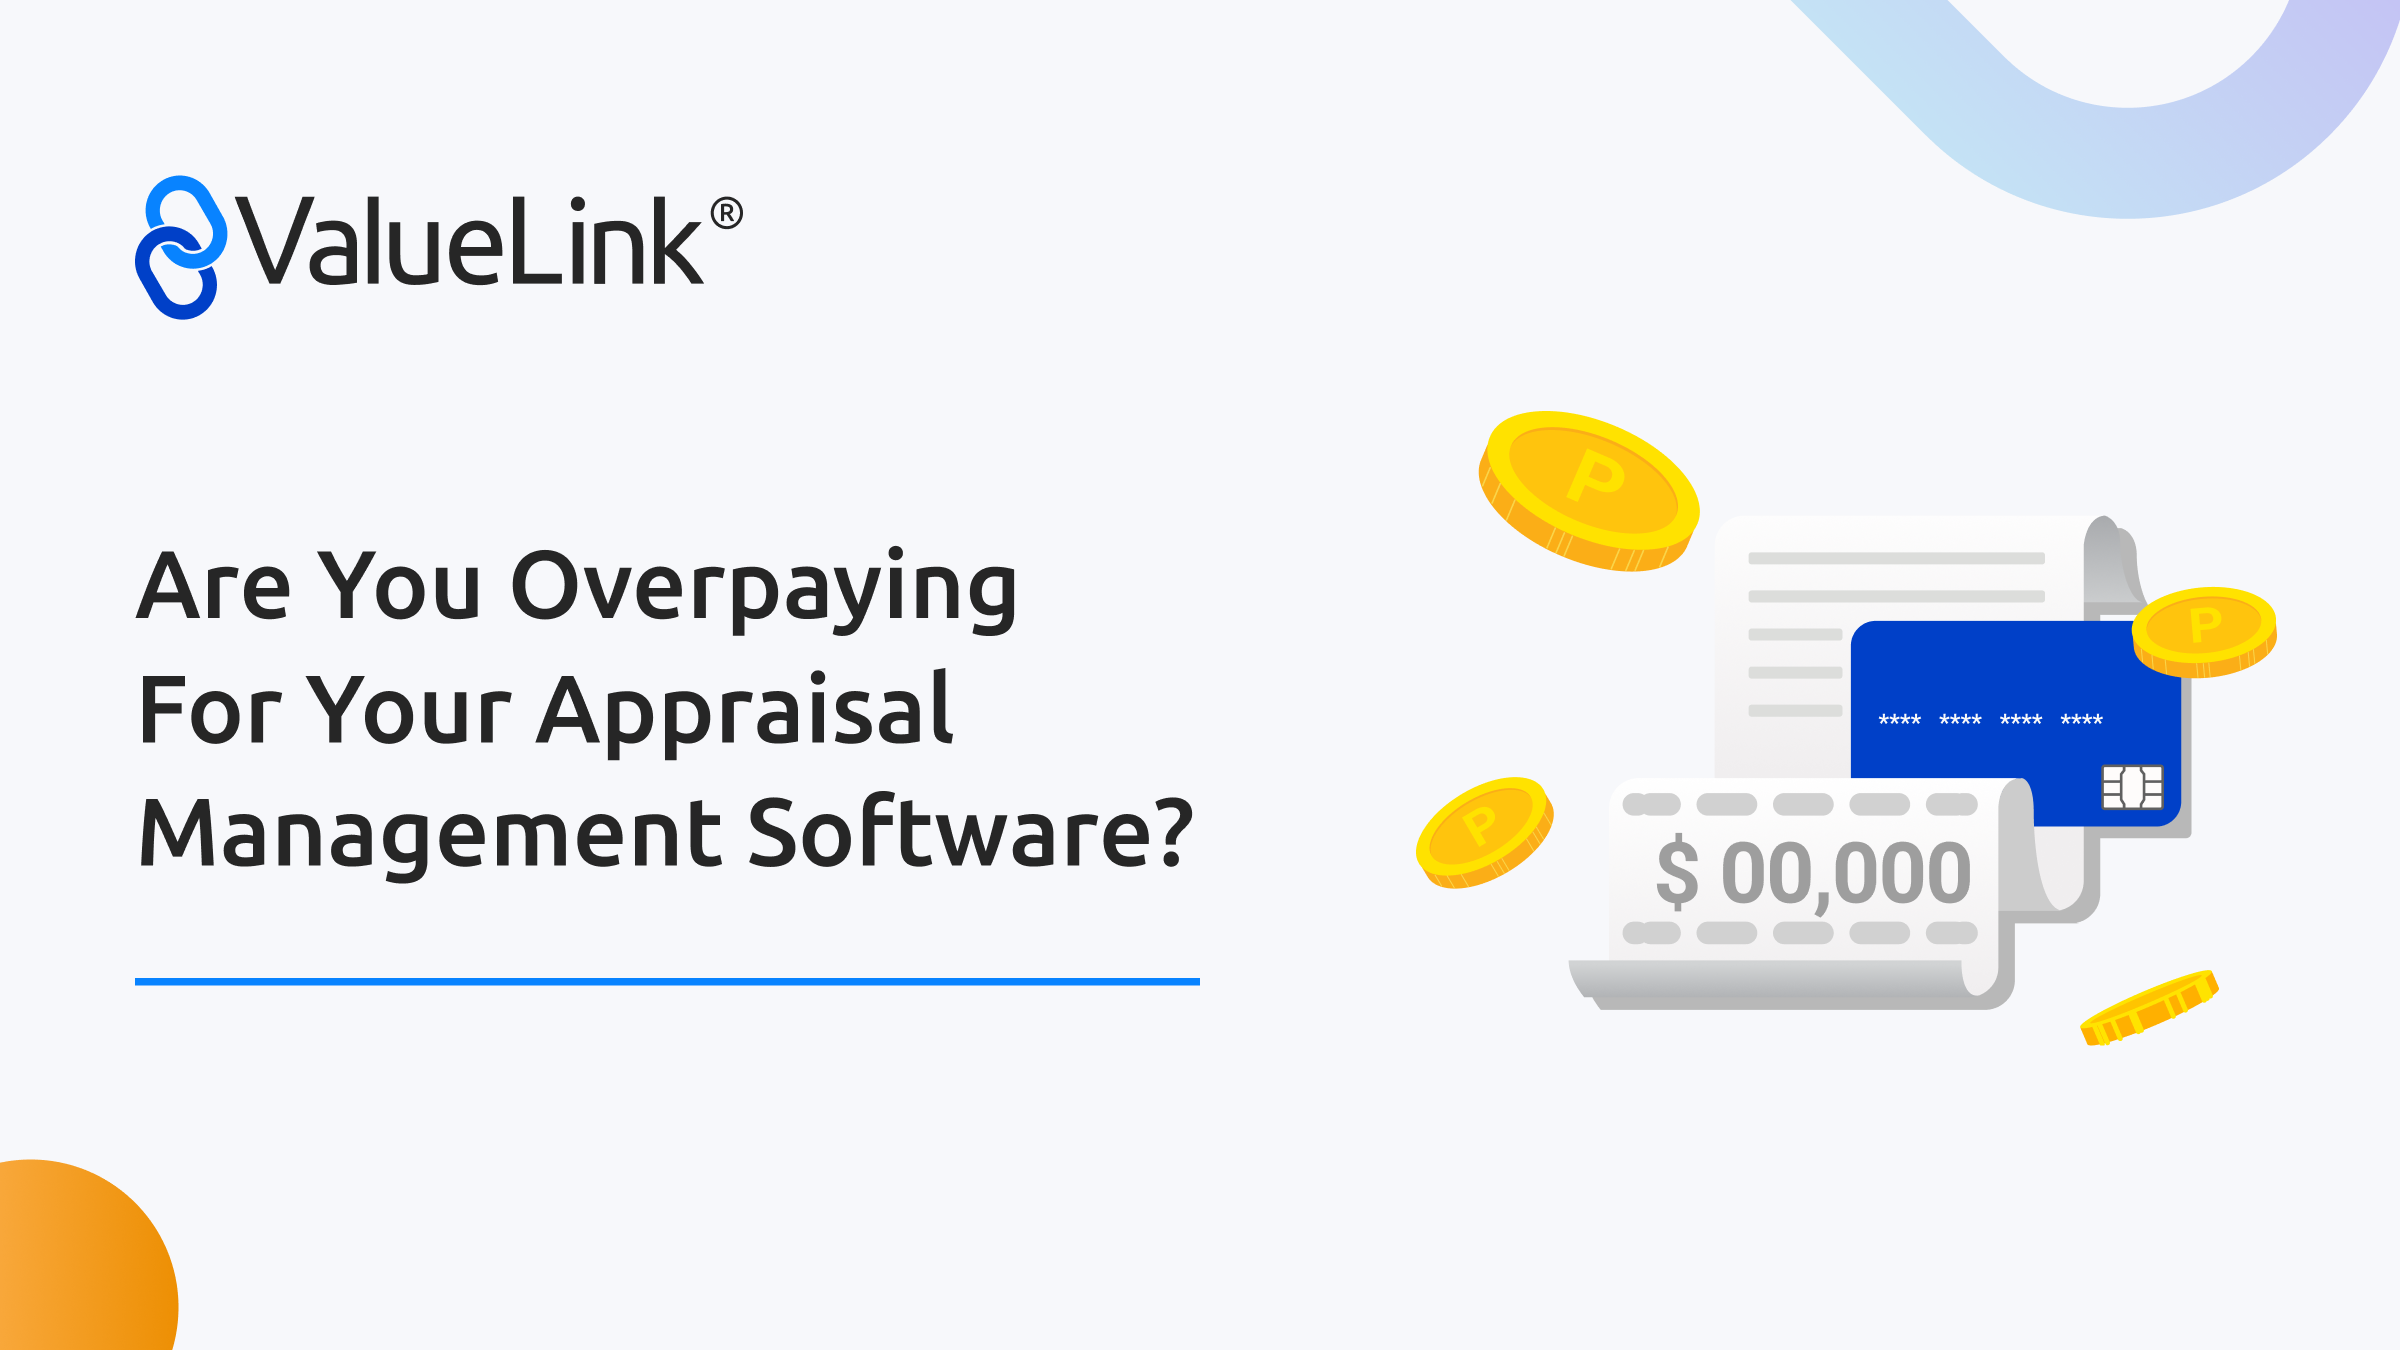 Over Paying For Your Appraisal Management Software